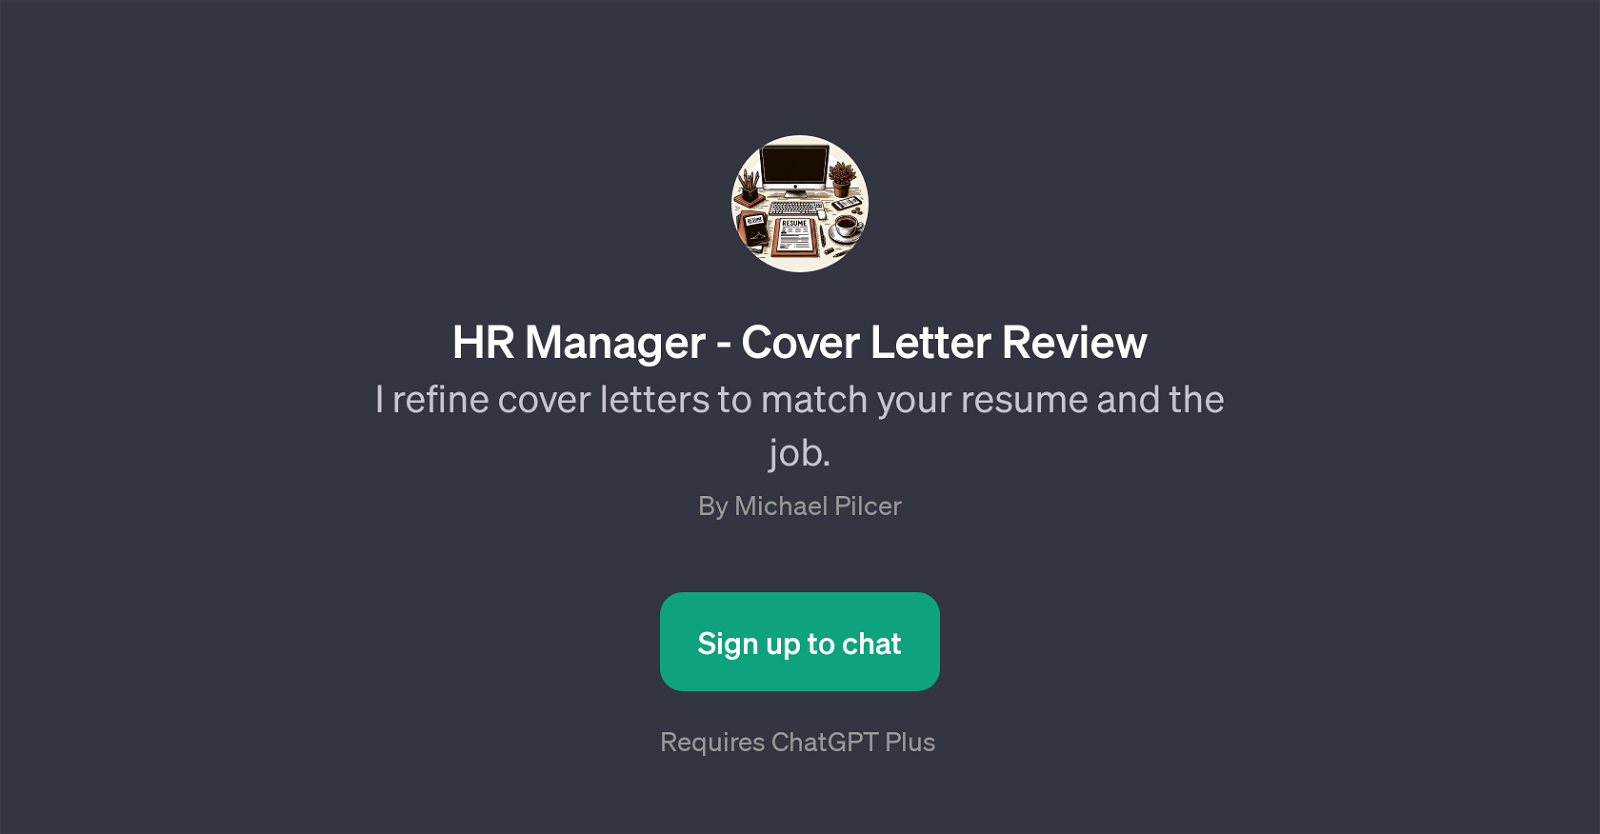 HR Manager - Cover Letter Review website